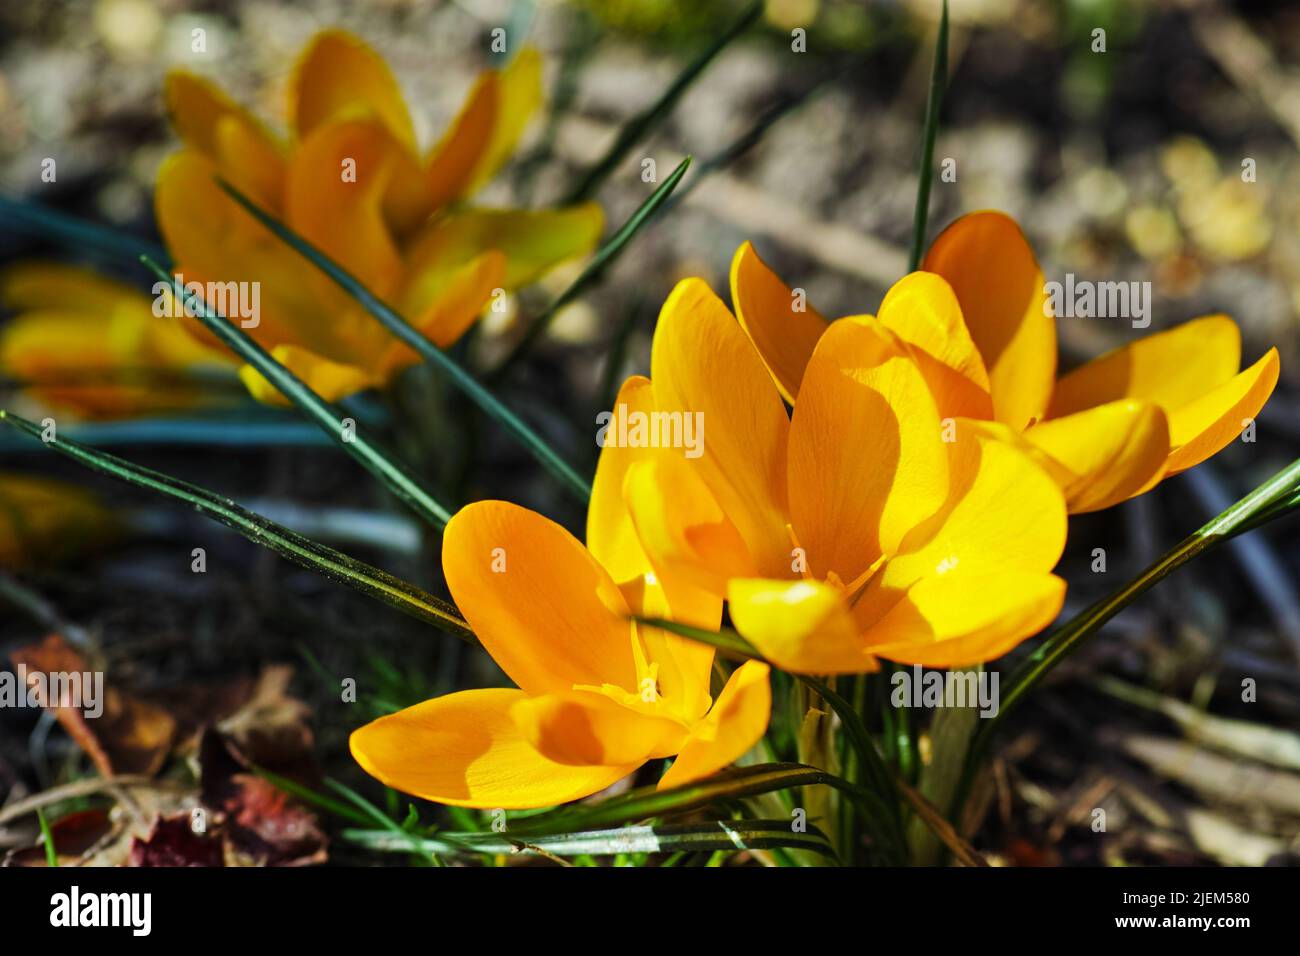 A portrait close-up of beautiful fresh bloomed flowers. The first spring flowers are yellow crocuses in a Giant Dutch crocus (Crocus venues), a crocus Stock Photo